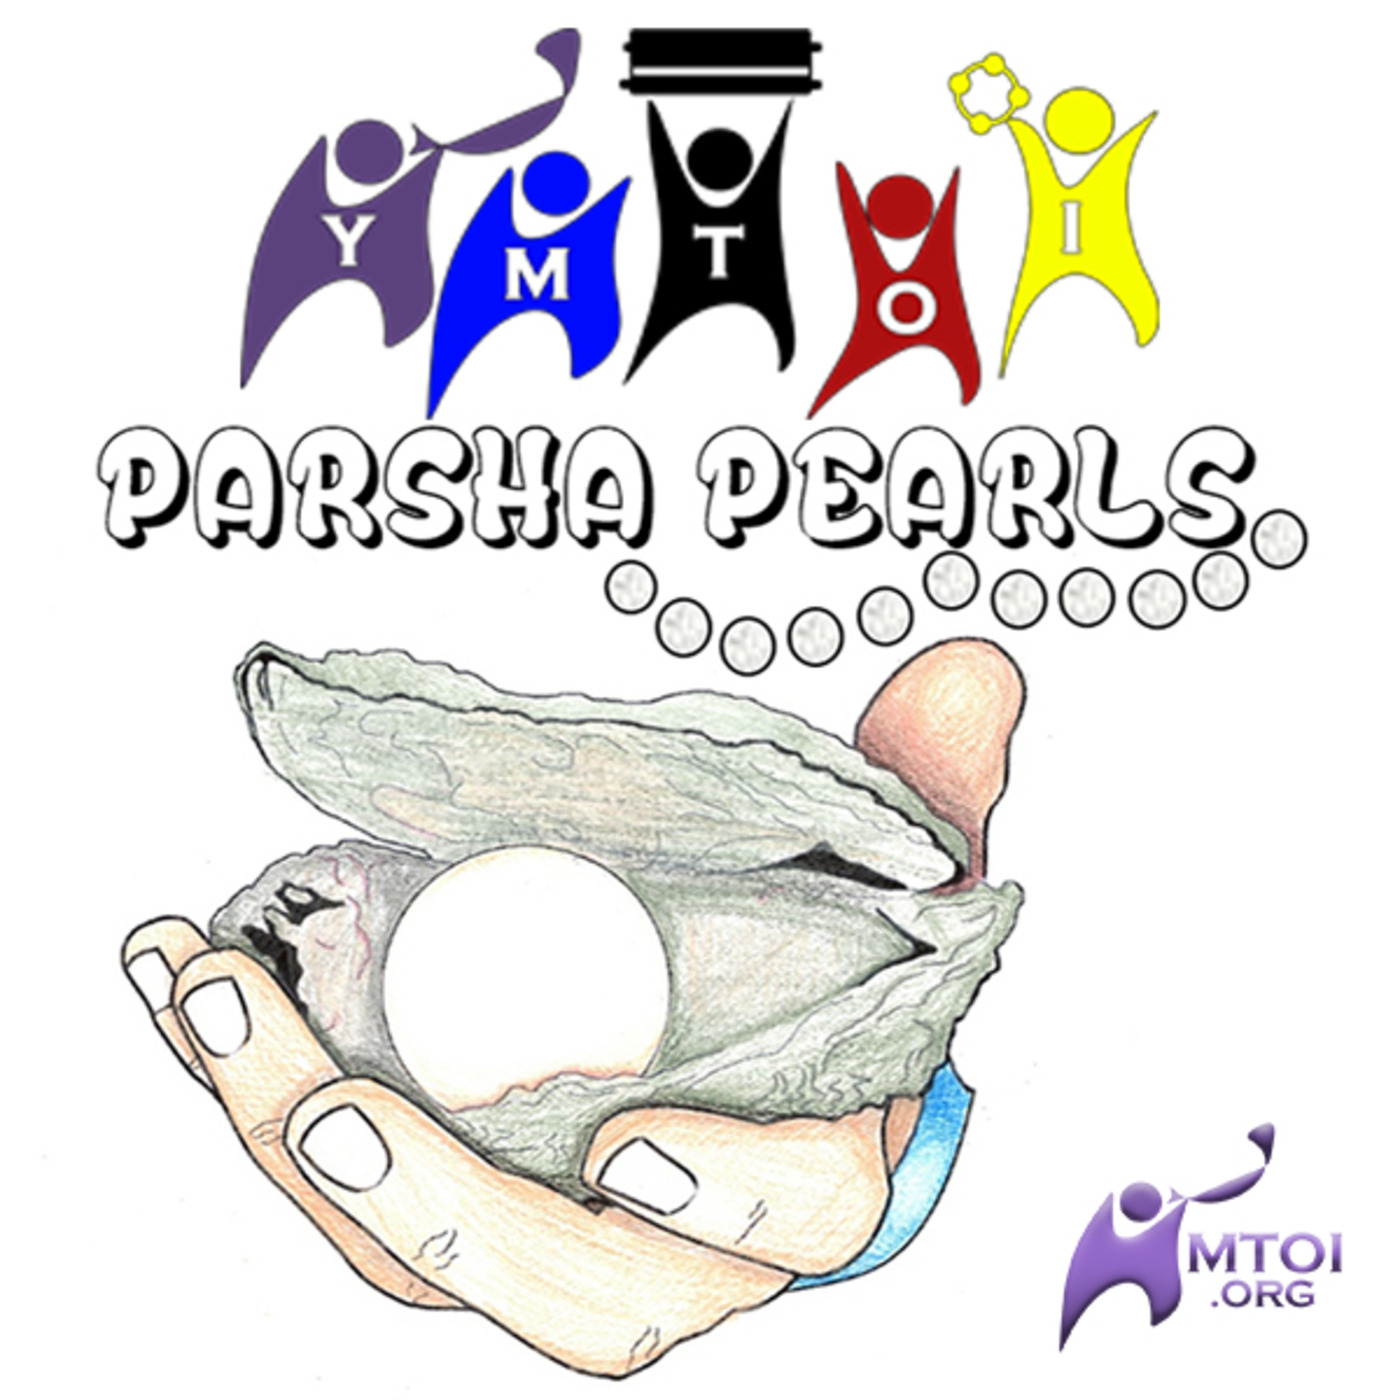 Episode 804: YMTOI Parsha Pearls Song for Vayigash 11.2 - Go Down To Mitsrayim